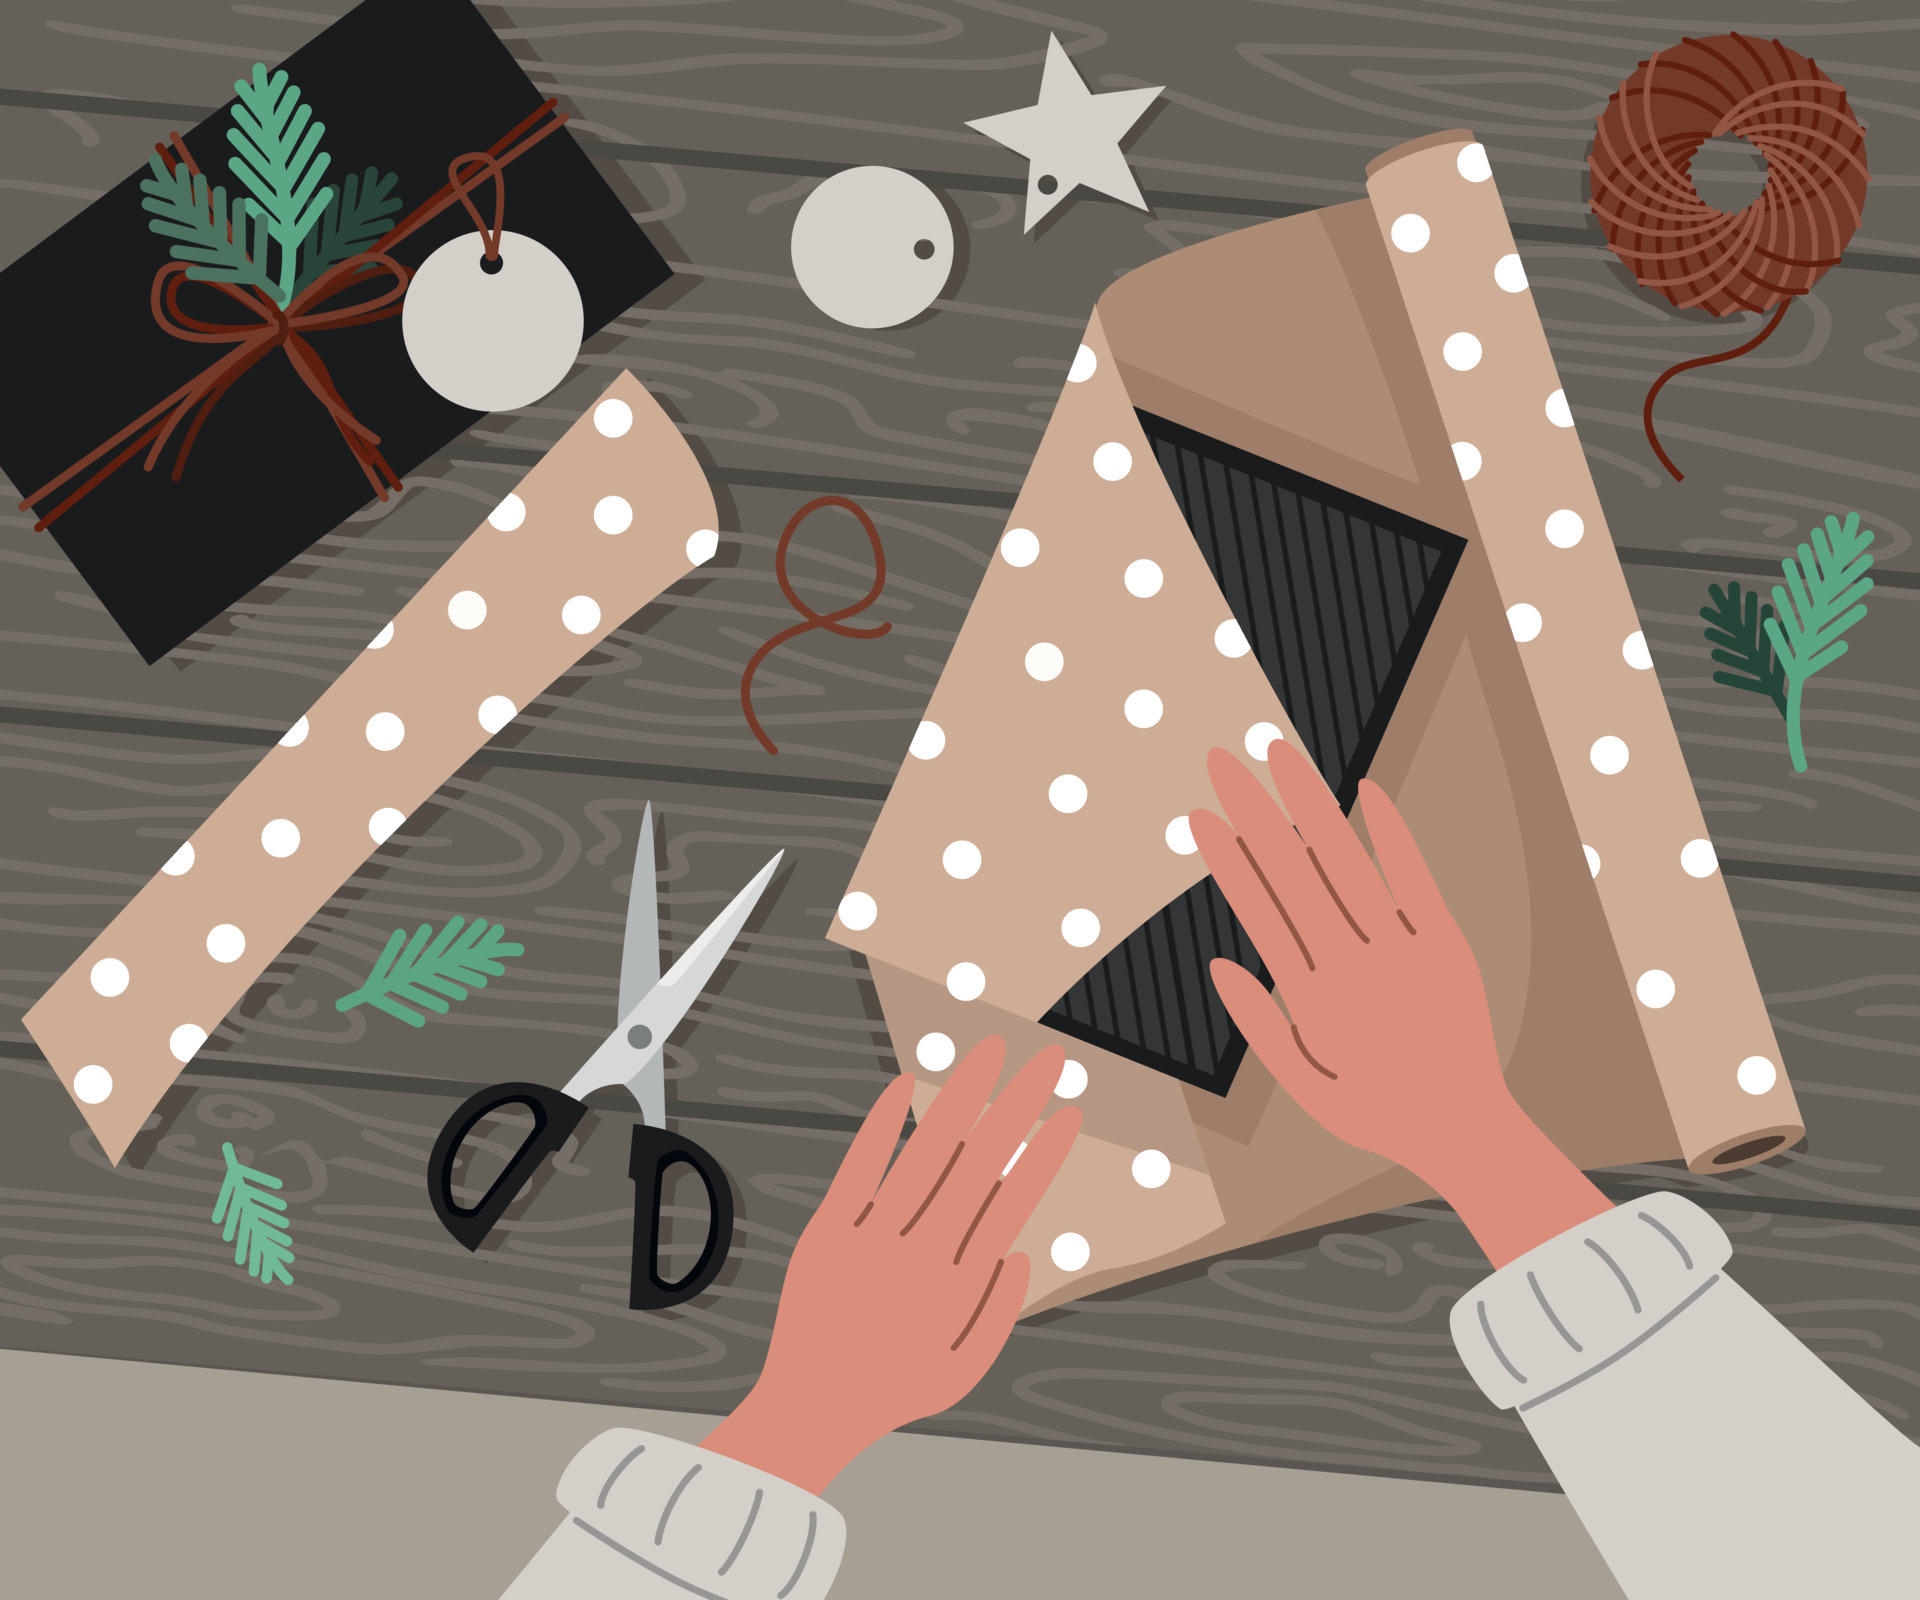 https://static.vecteezy.com/system/resources/previews/014/495/155/original/the-process-of-wrapping-christmas-gifts-wrapping-paper-scissors-in-flat-style-vector.jpg